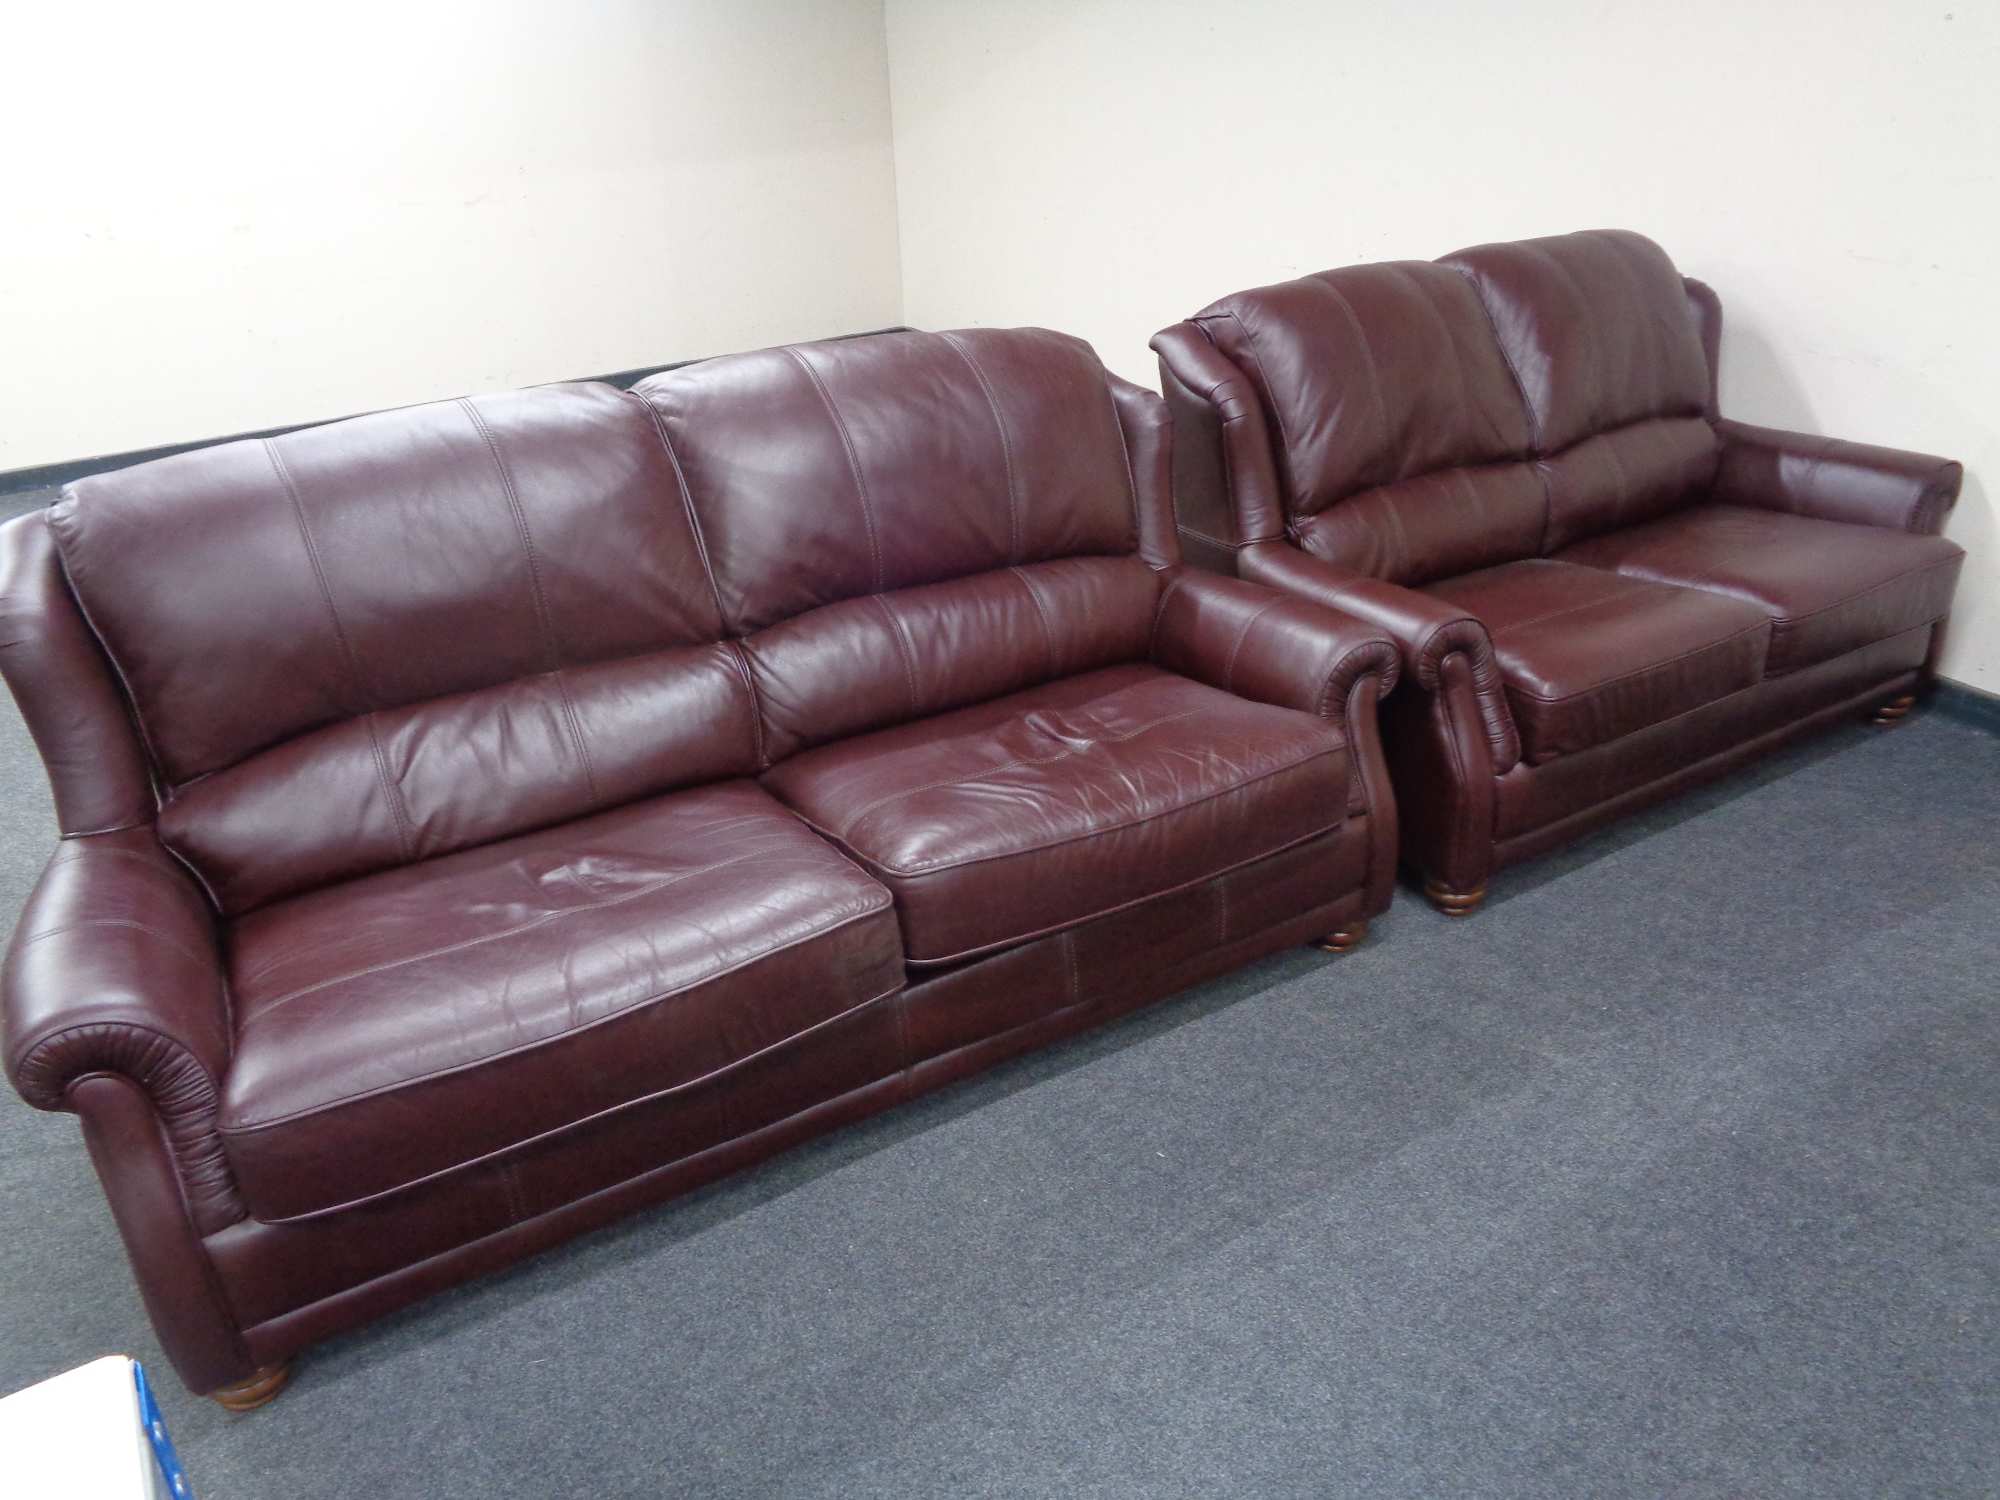 A Wade Additions Burgundy leather three seater settee with matching two seater settee.